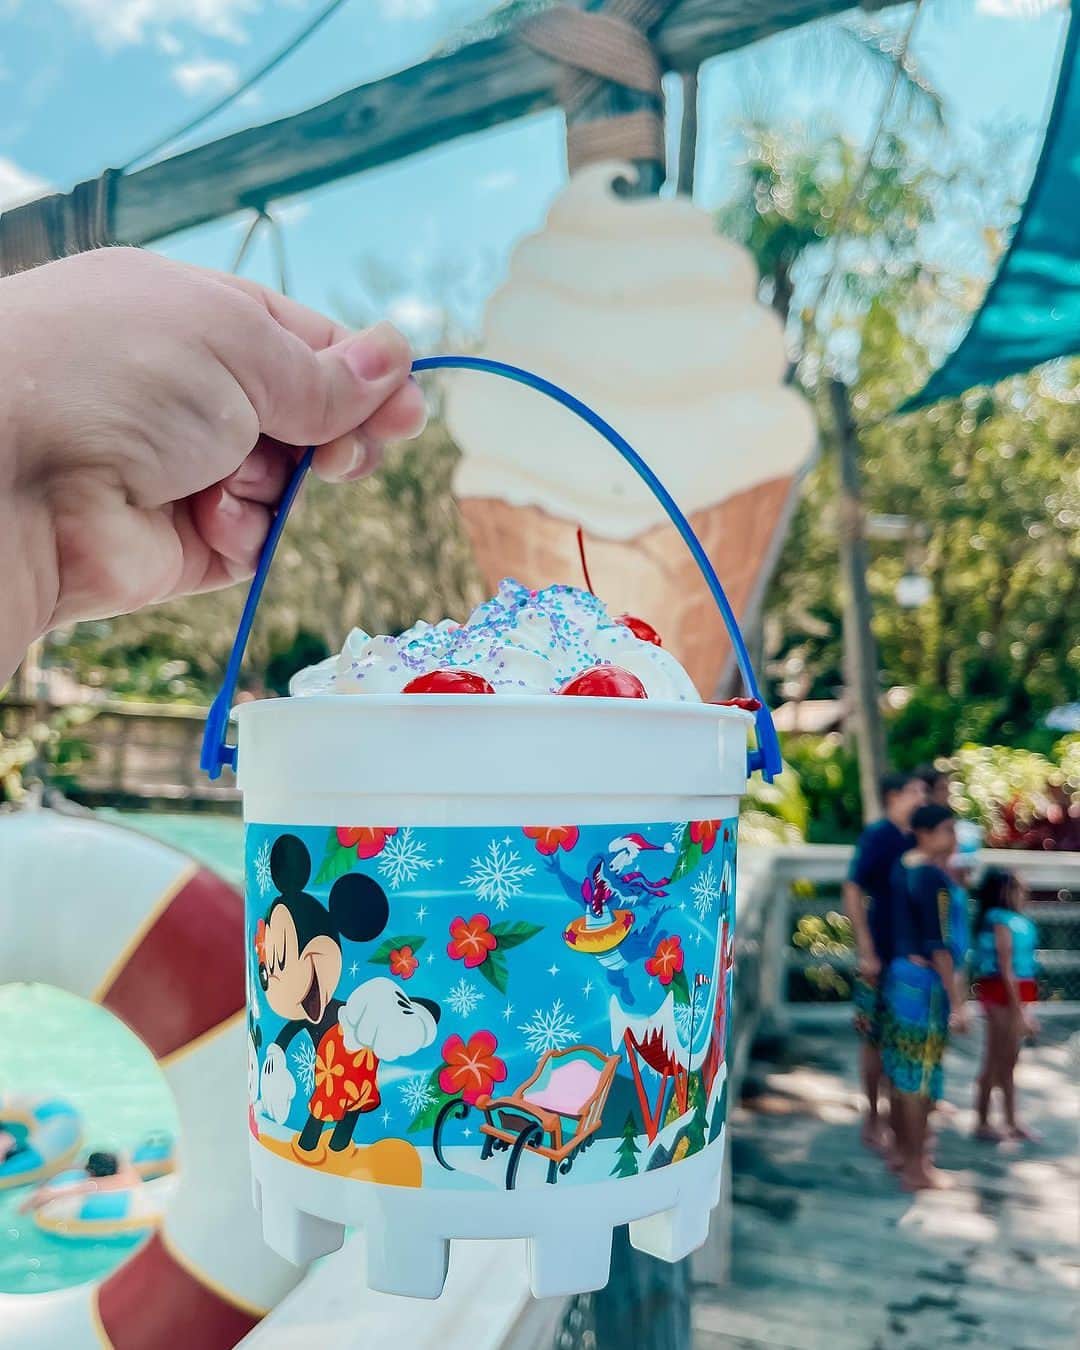 Walt Disney Worldのインスタグラム：「Nothing better than celebrating the last splashes of summer with sundaes at Typhoon Lagoon. 🌊 Drop a 🍨 if you agree! (📸: @friend.like.autumn)」